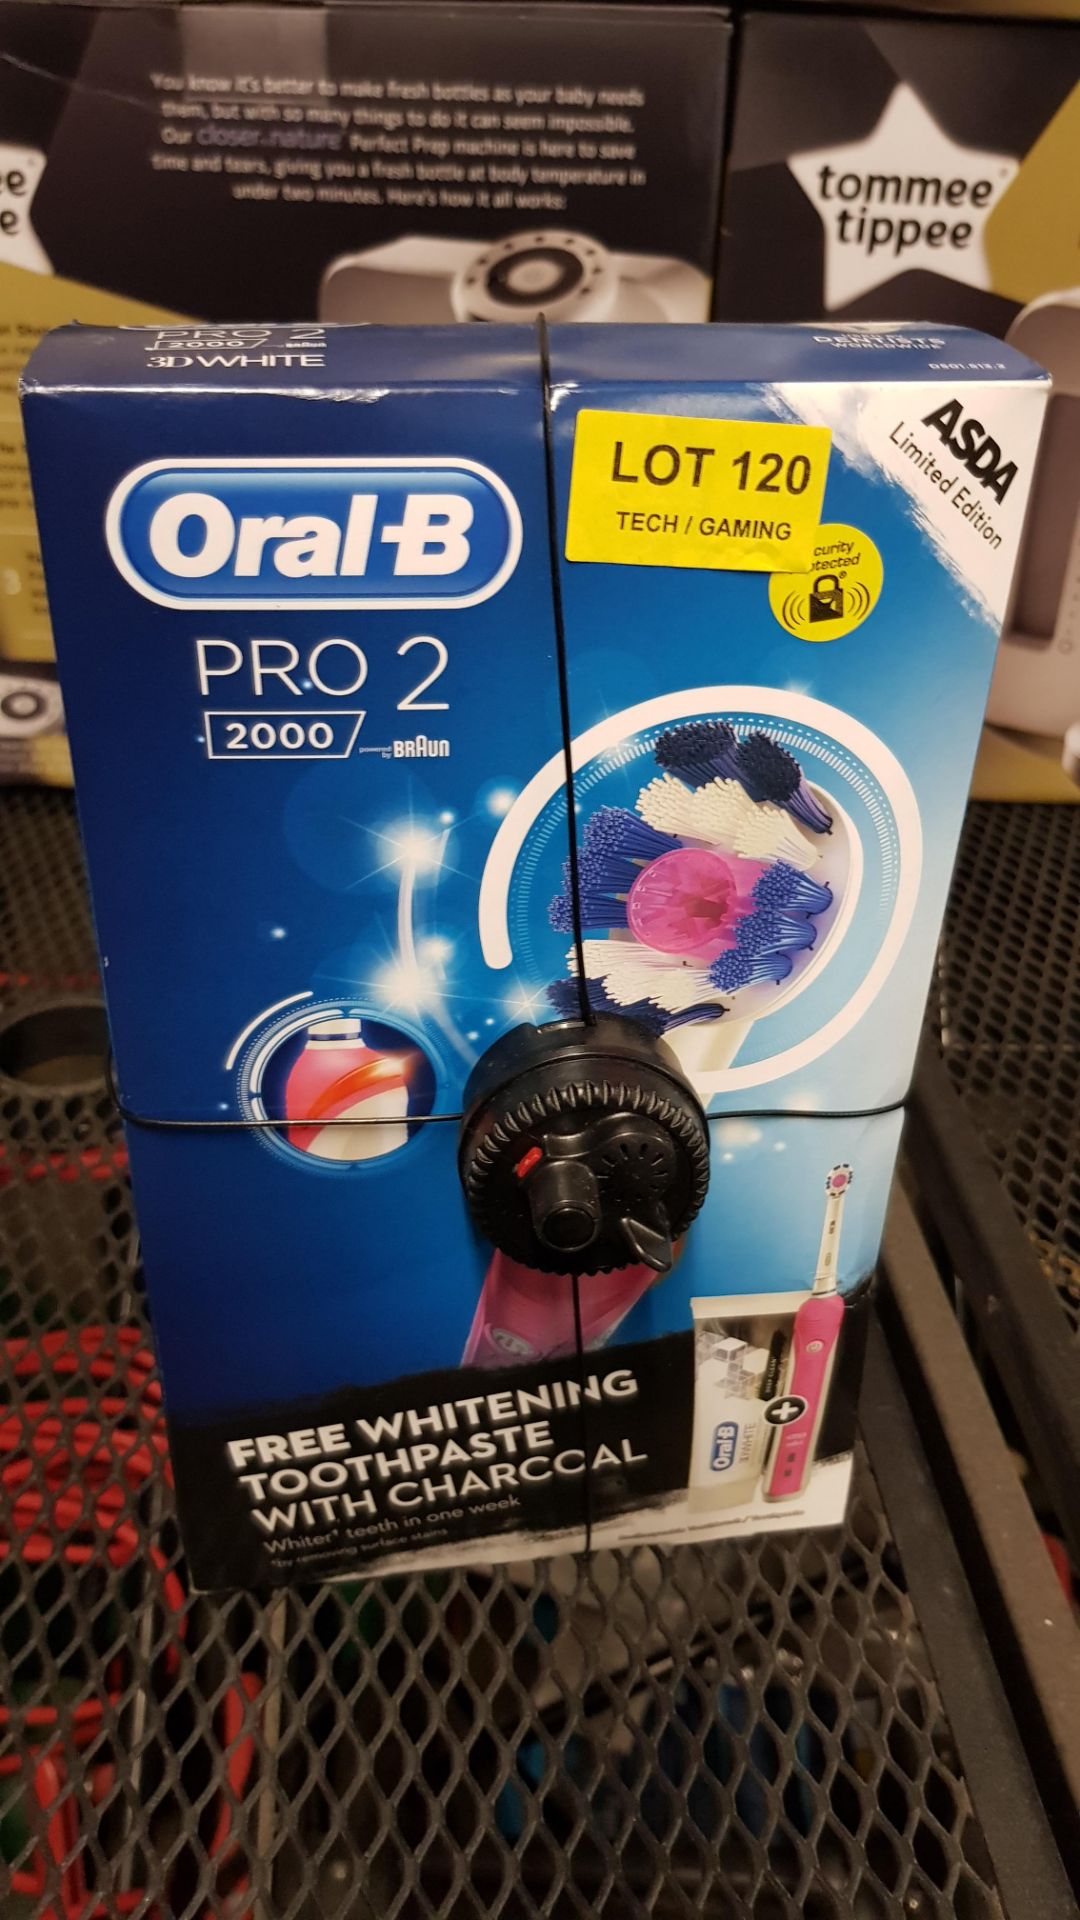 (R14F) 1x Oral B PRO 2 2000 Electric Toothbrush RRP £80. New, Sealed Item With Security Tag Attach - Image 2 of 2